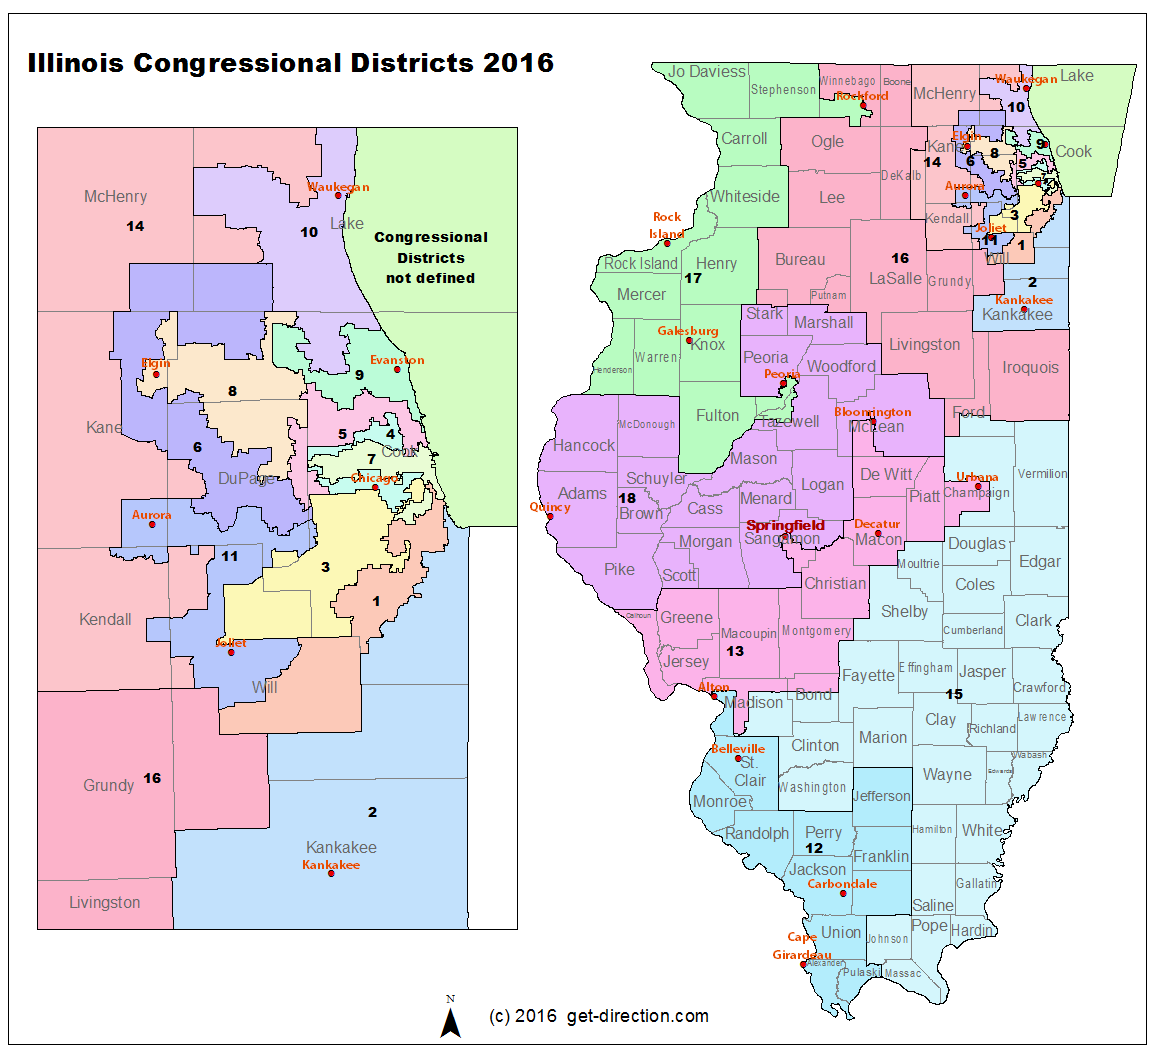 illinois-congressional-districts-2016.png